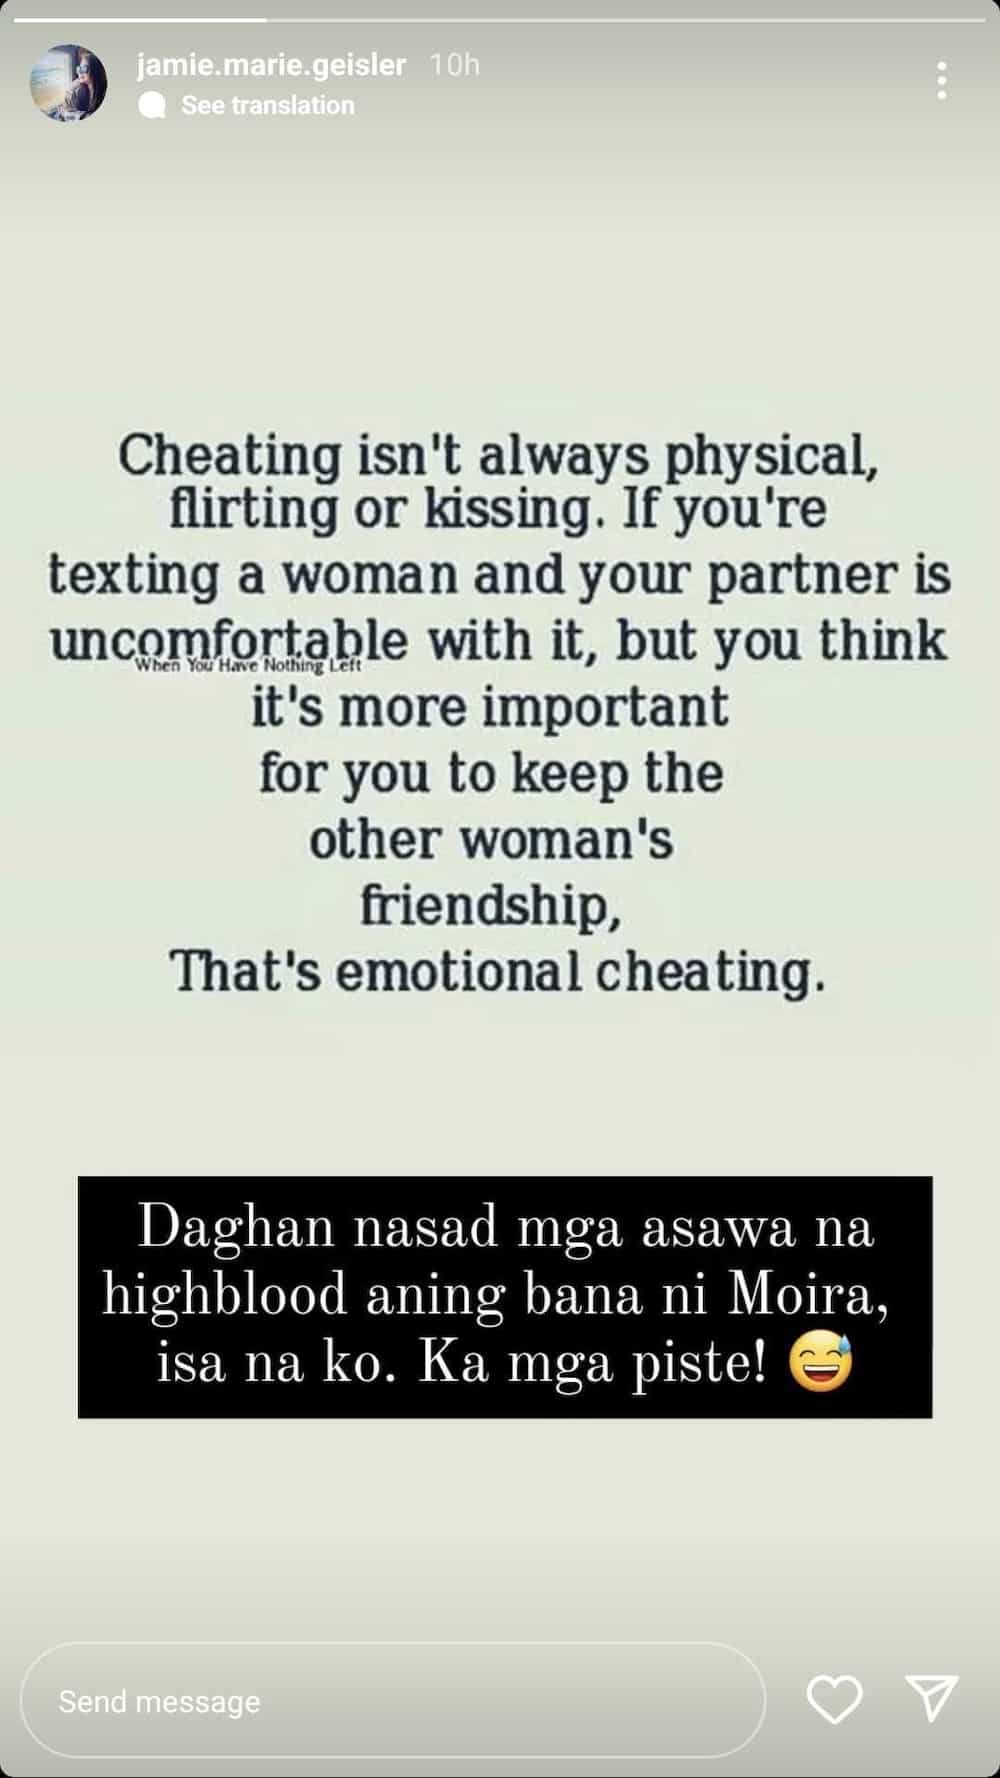 Baron Geisler's wife posts about emotional cheating; mentions "Moira" in viral post